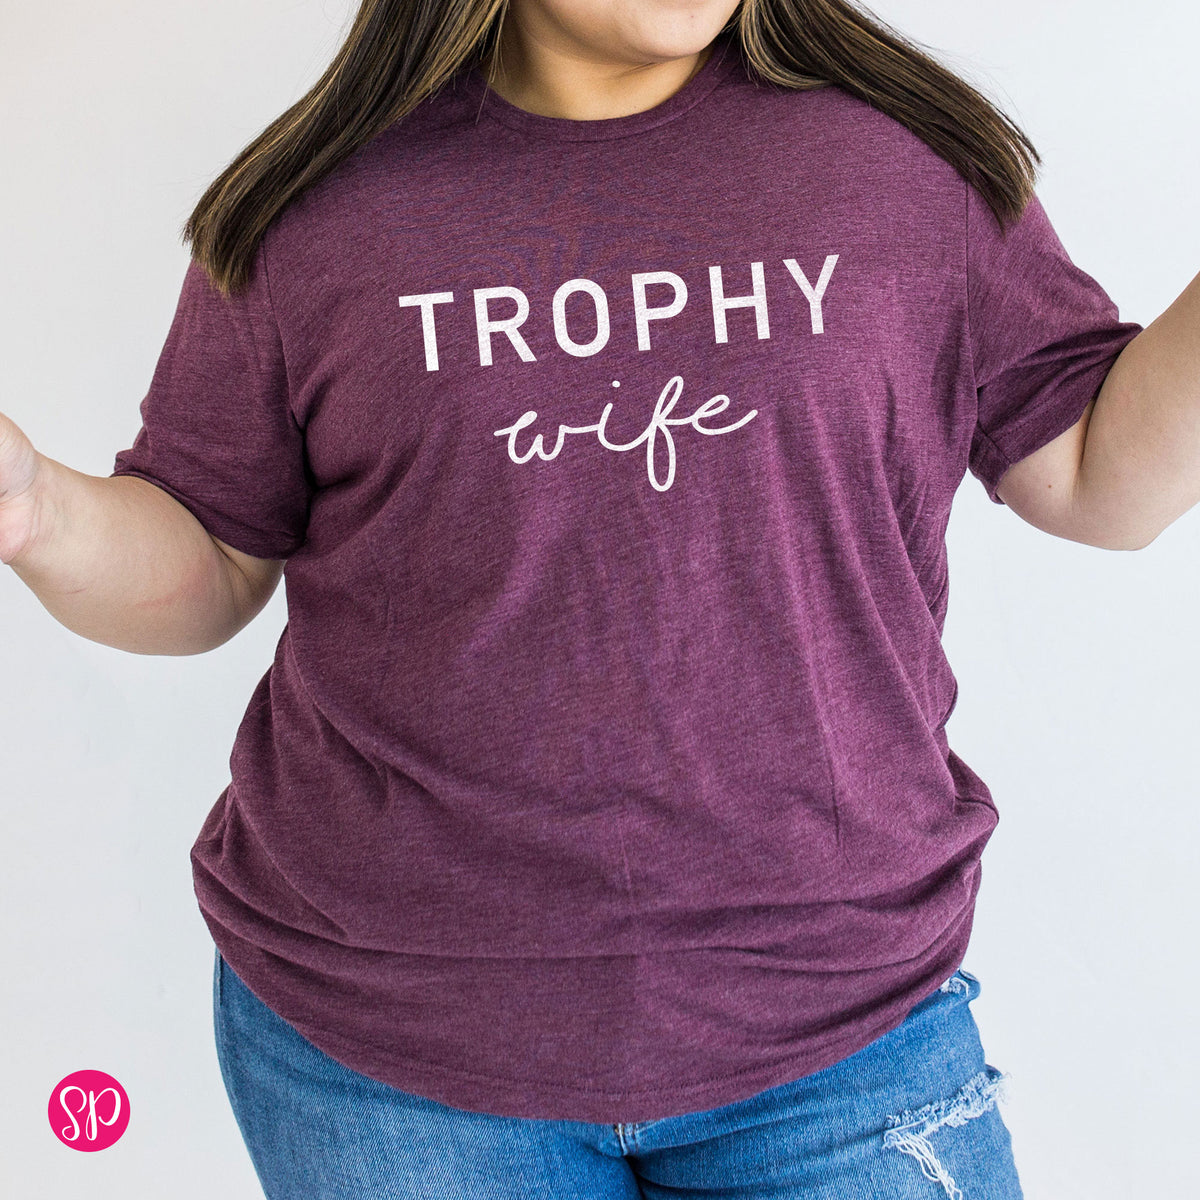 Trophy Wife Funny Gift Anniversary Newly Wed Wedding Graphic Tee Shirt Spouse